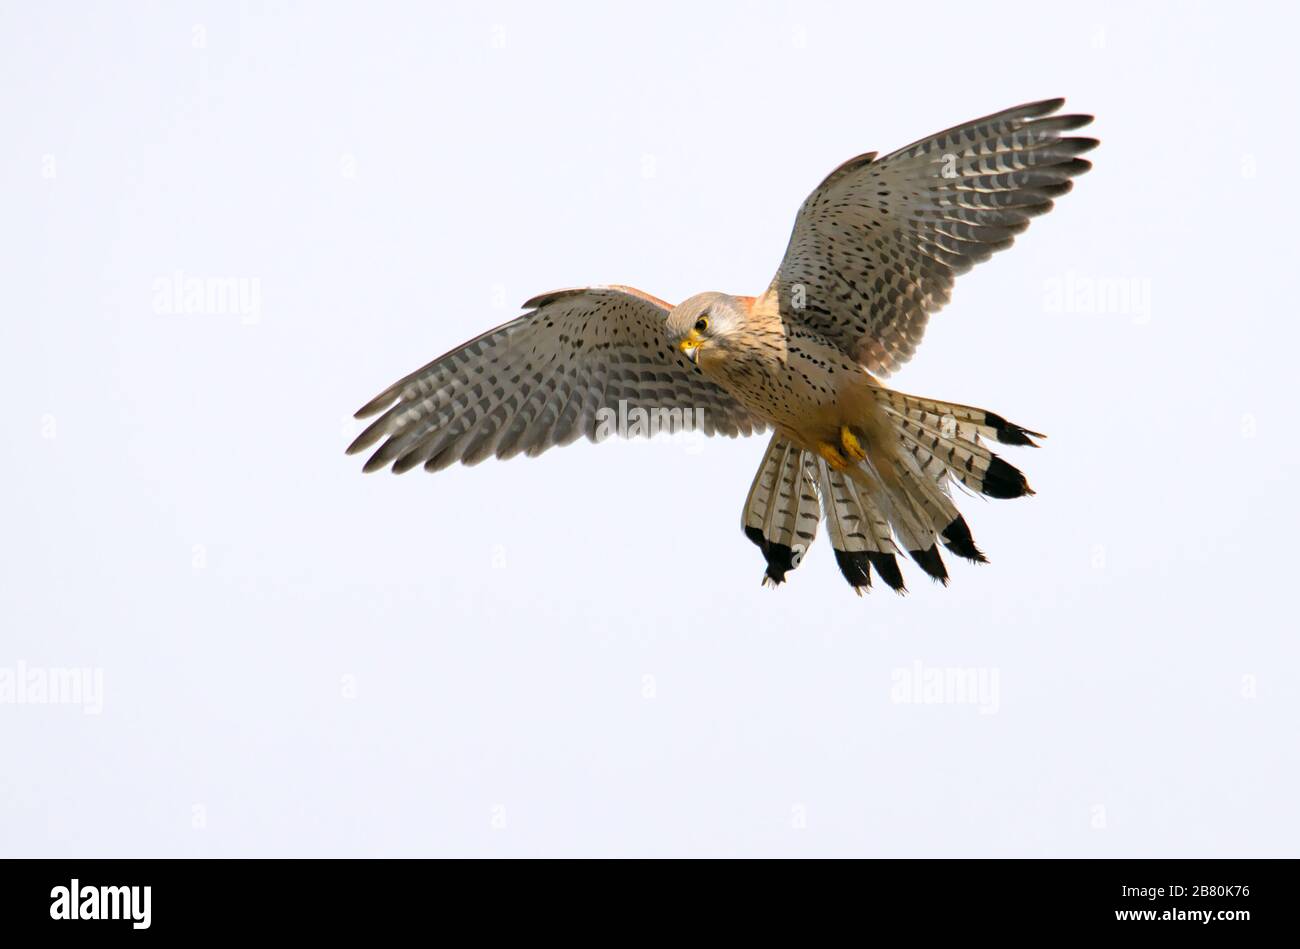 Kestrel, Falco Tinnunculus, Hovering Searching For Food On The Ground With Wings Extended And Flared Tail. Taken at Keyhaven UK Stock Photo